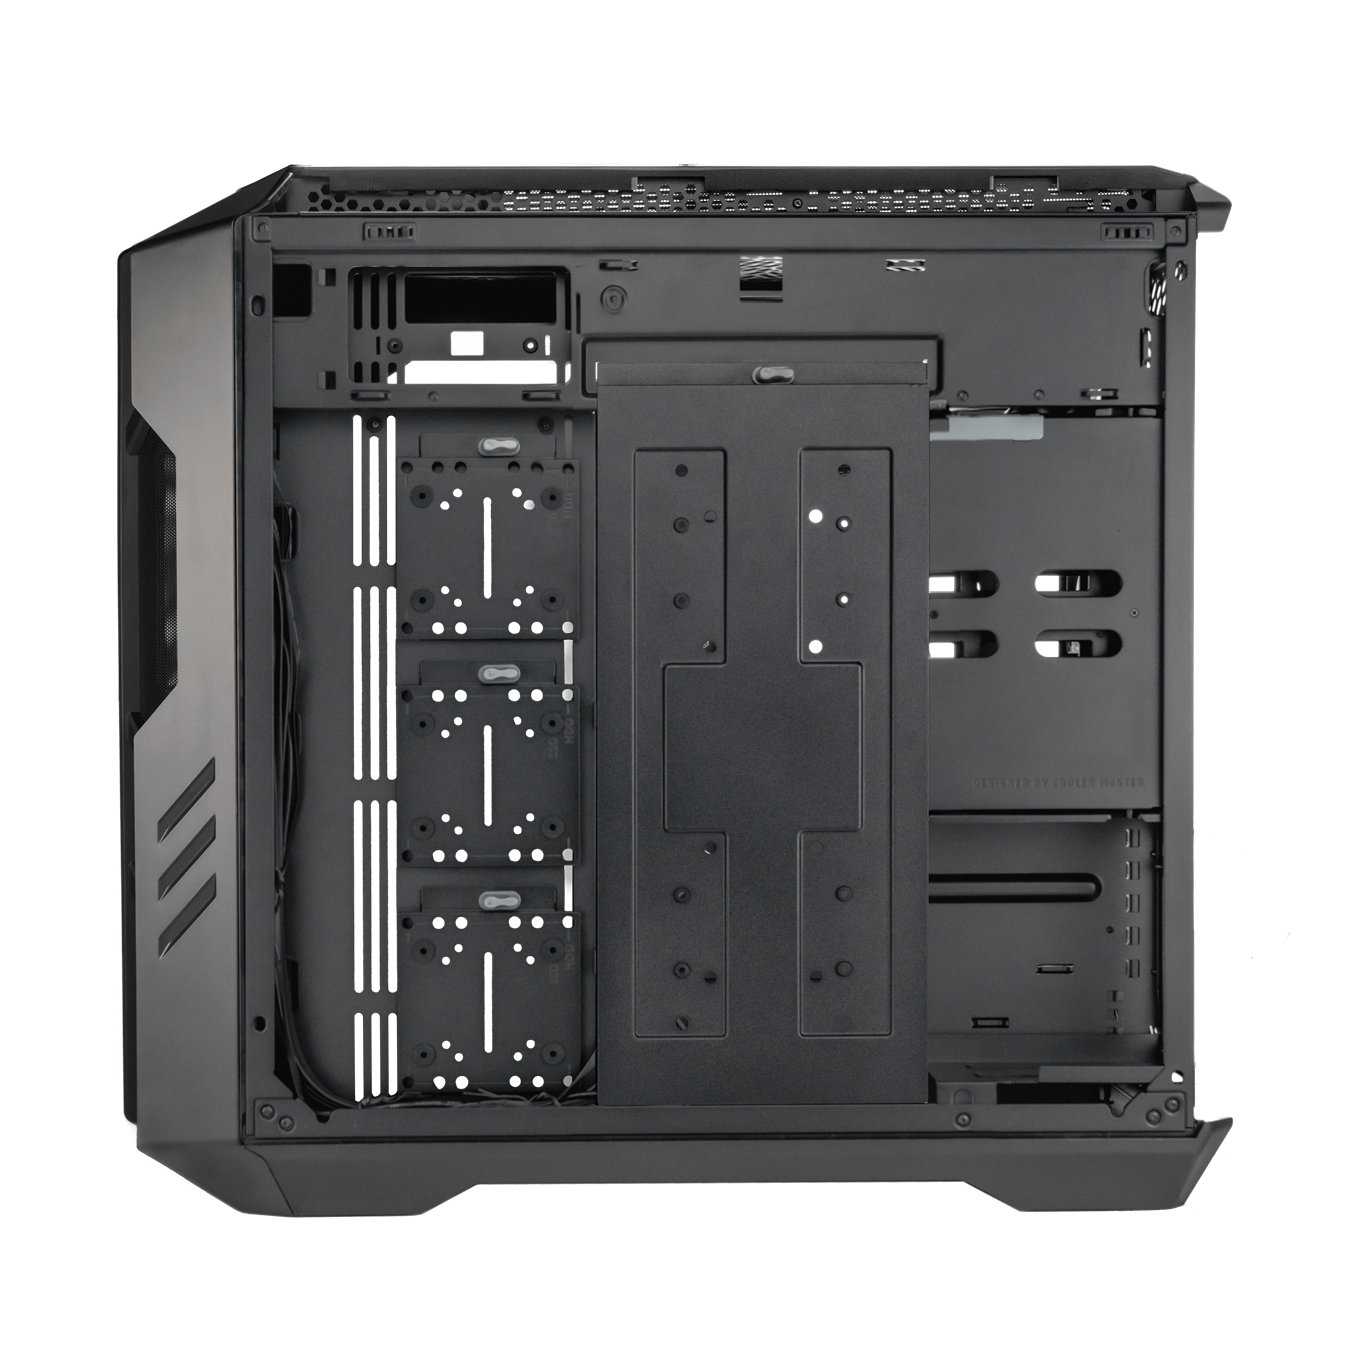 HAF 700 features versatile brackets that can be used to mount an SSD, HDD, or a pump/reservoir for liquid cooling.